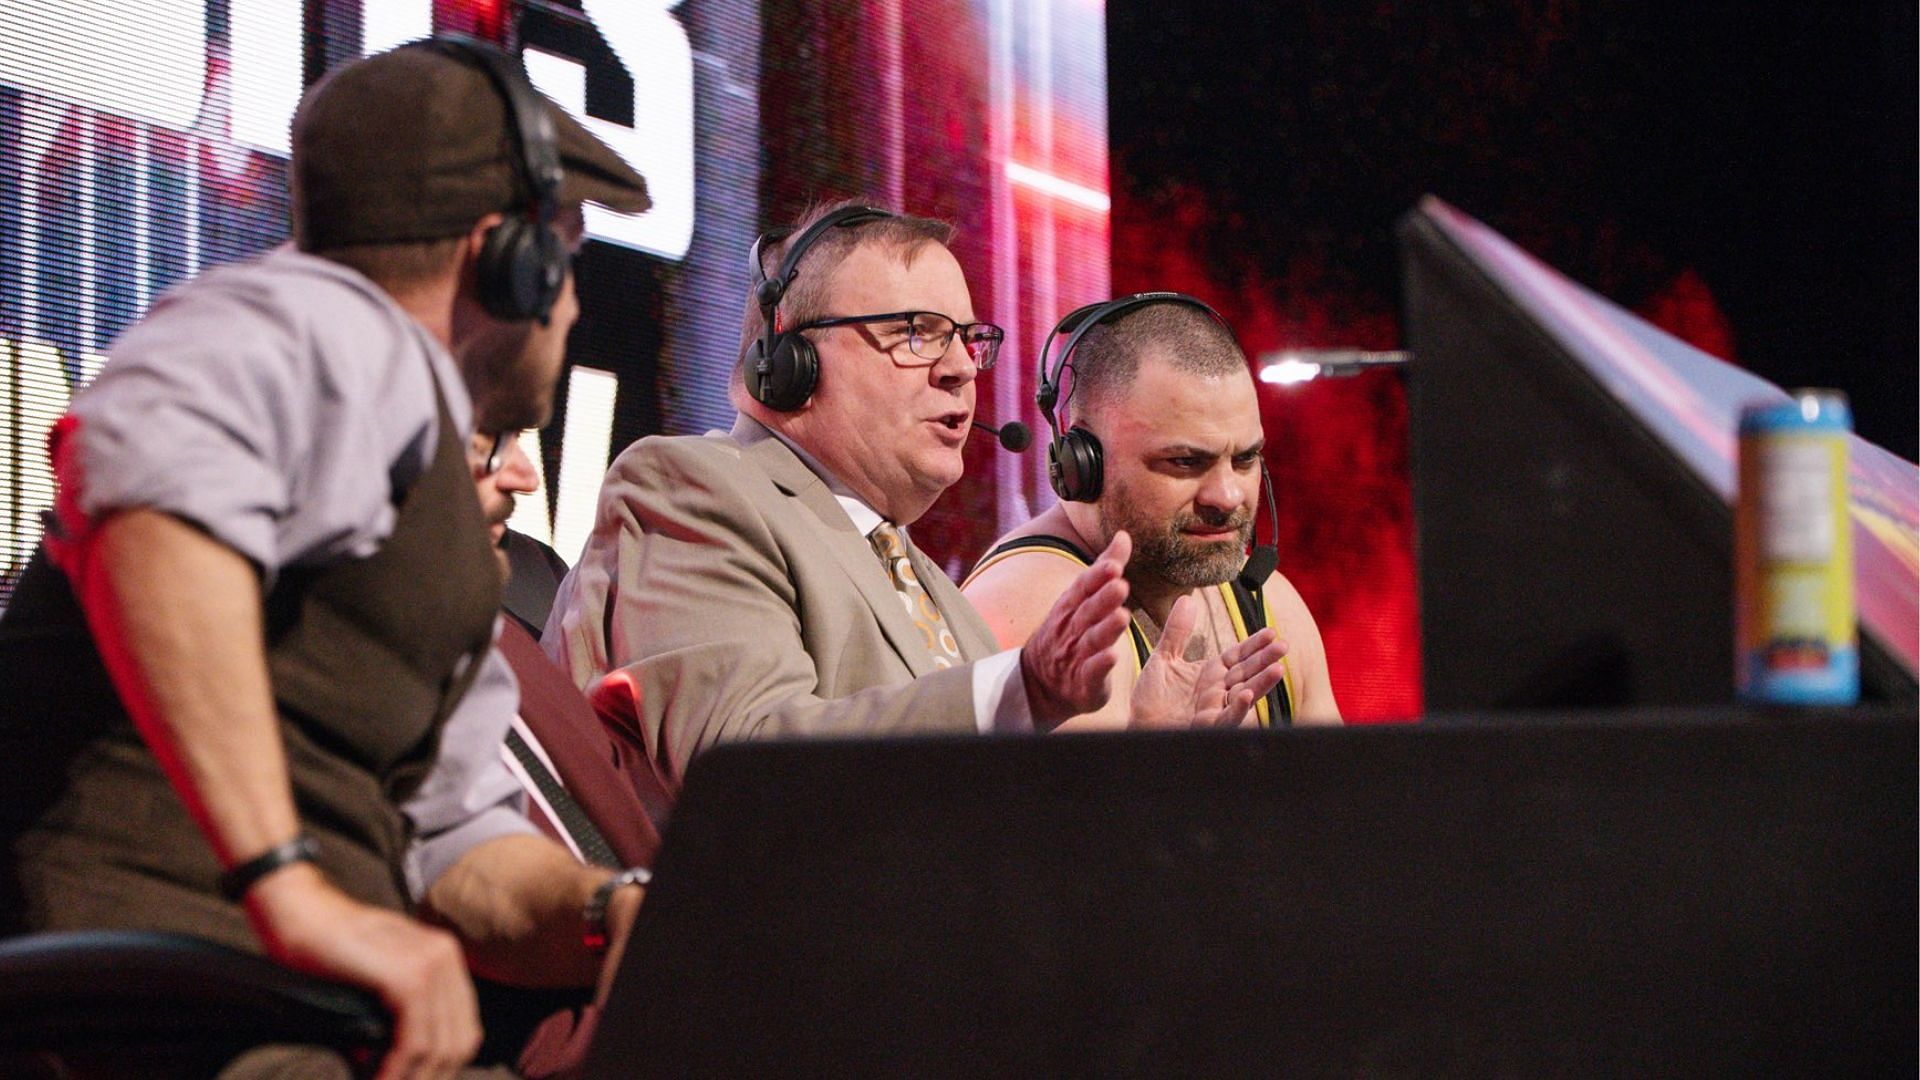 Kevin Kelly has worked play-by-play for AEW since Collision